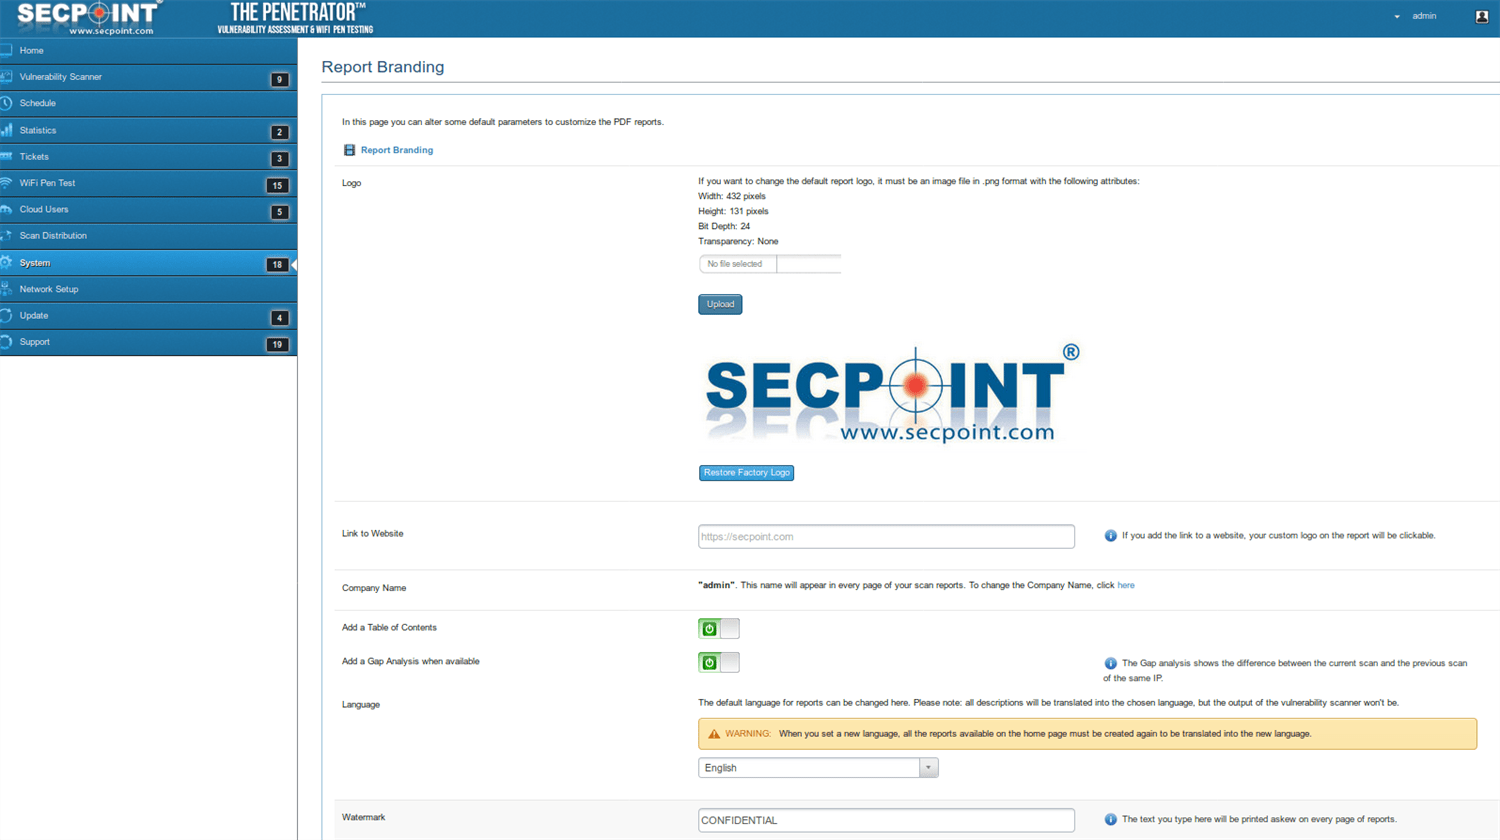 SecPoint Penetrator S9 - 64 IP Concurrent Scan License Vuln Scanning Appliance (3 Years License) - SecPoint